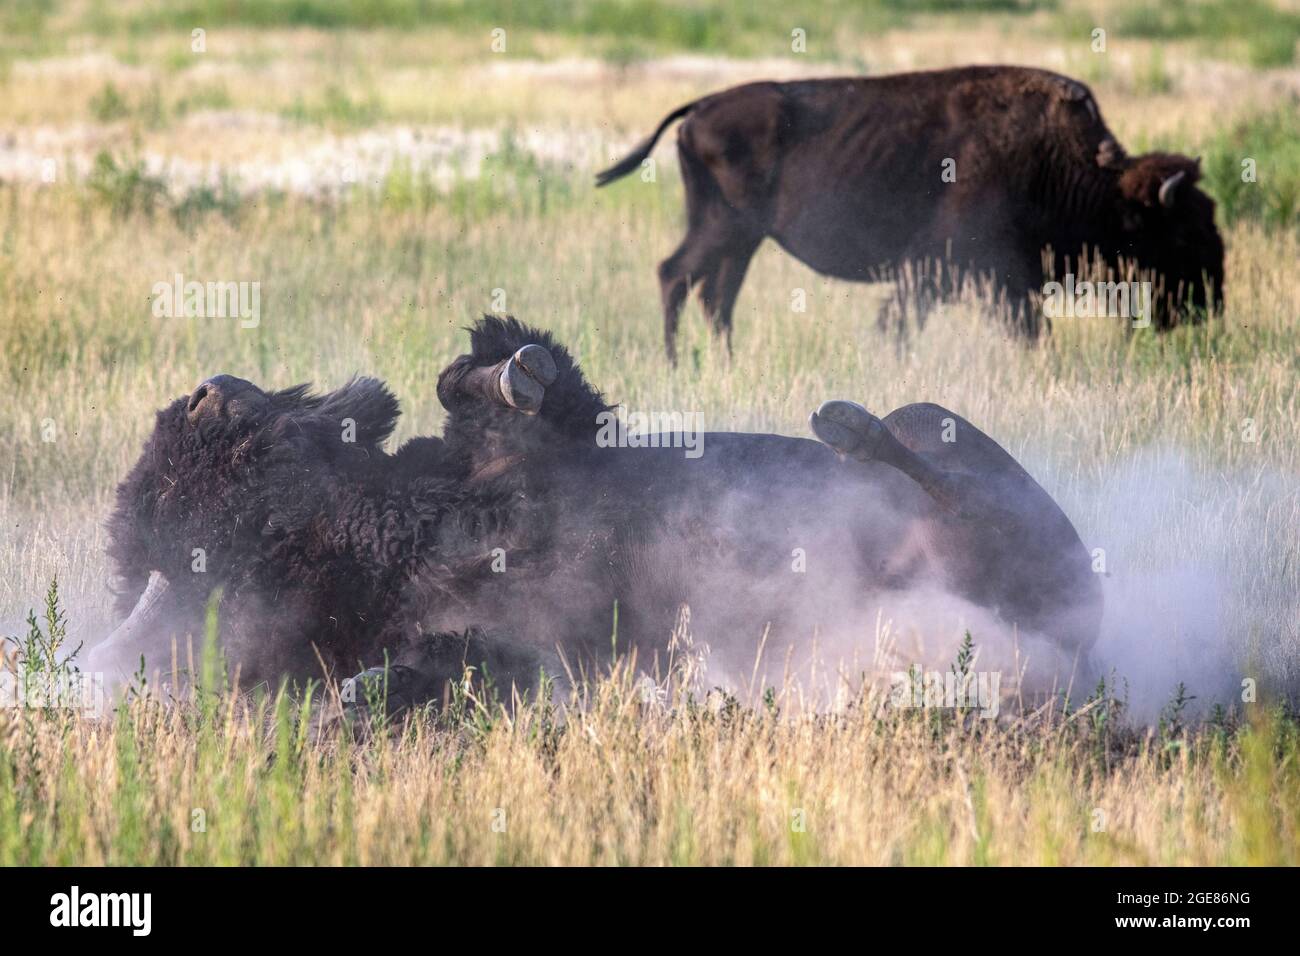 American Bison (Bison bison) rolling in dirt (wallowing) - Rocky Mountain Arsenal National Wildlife Refuge, Commerce City, near Denver, Colorado [Imag Stock Photo